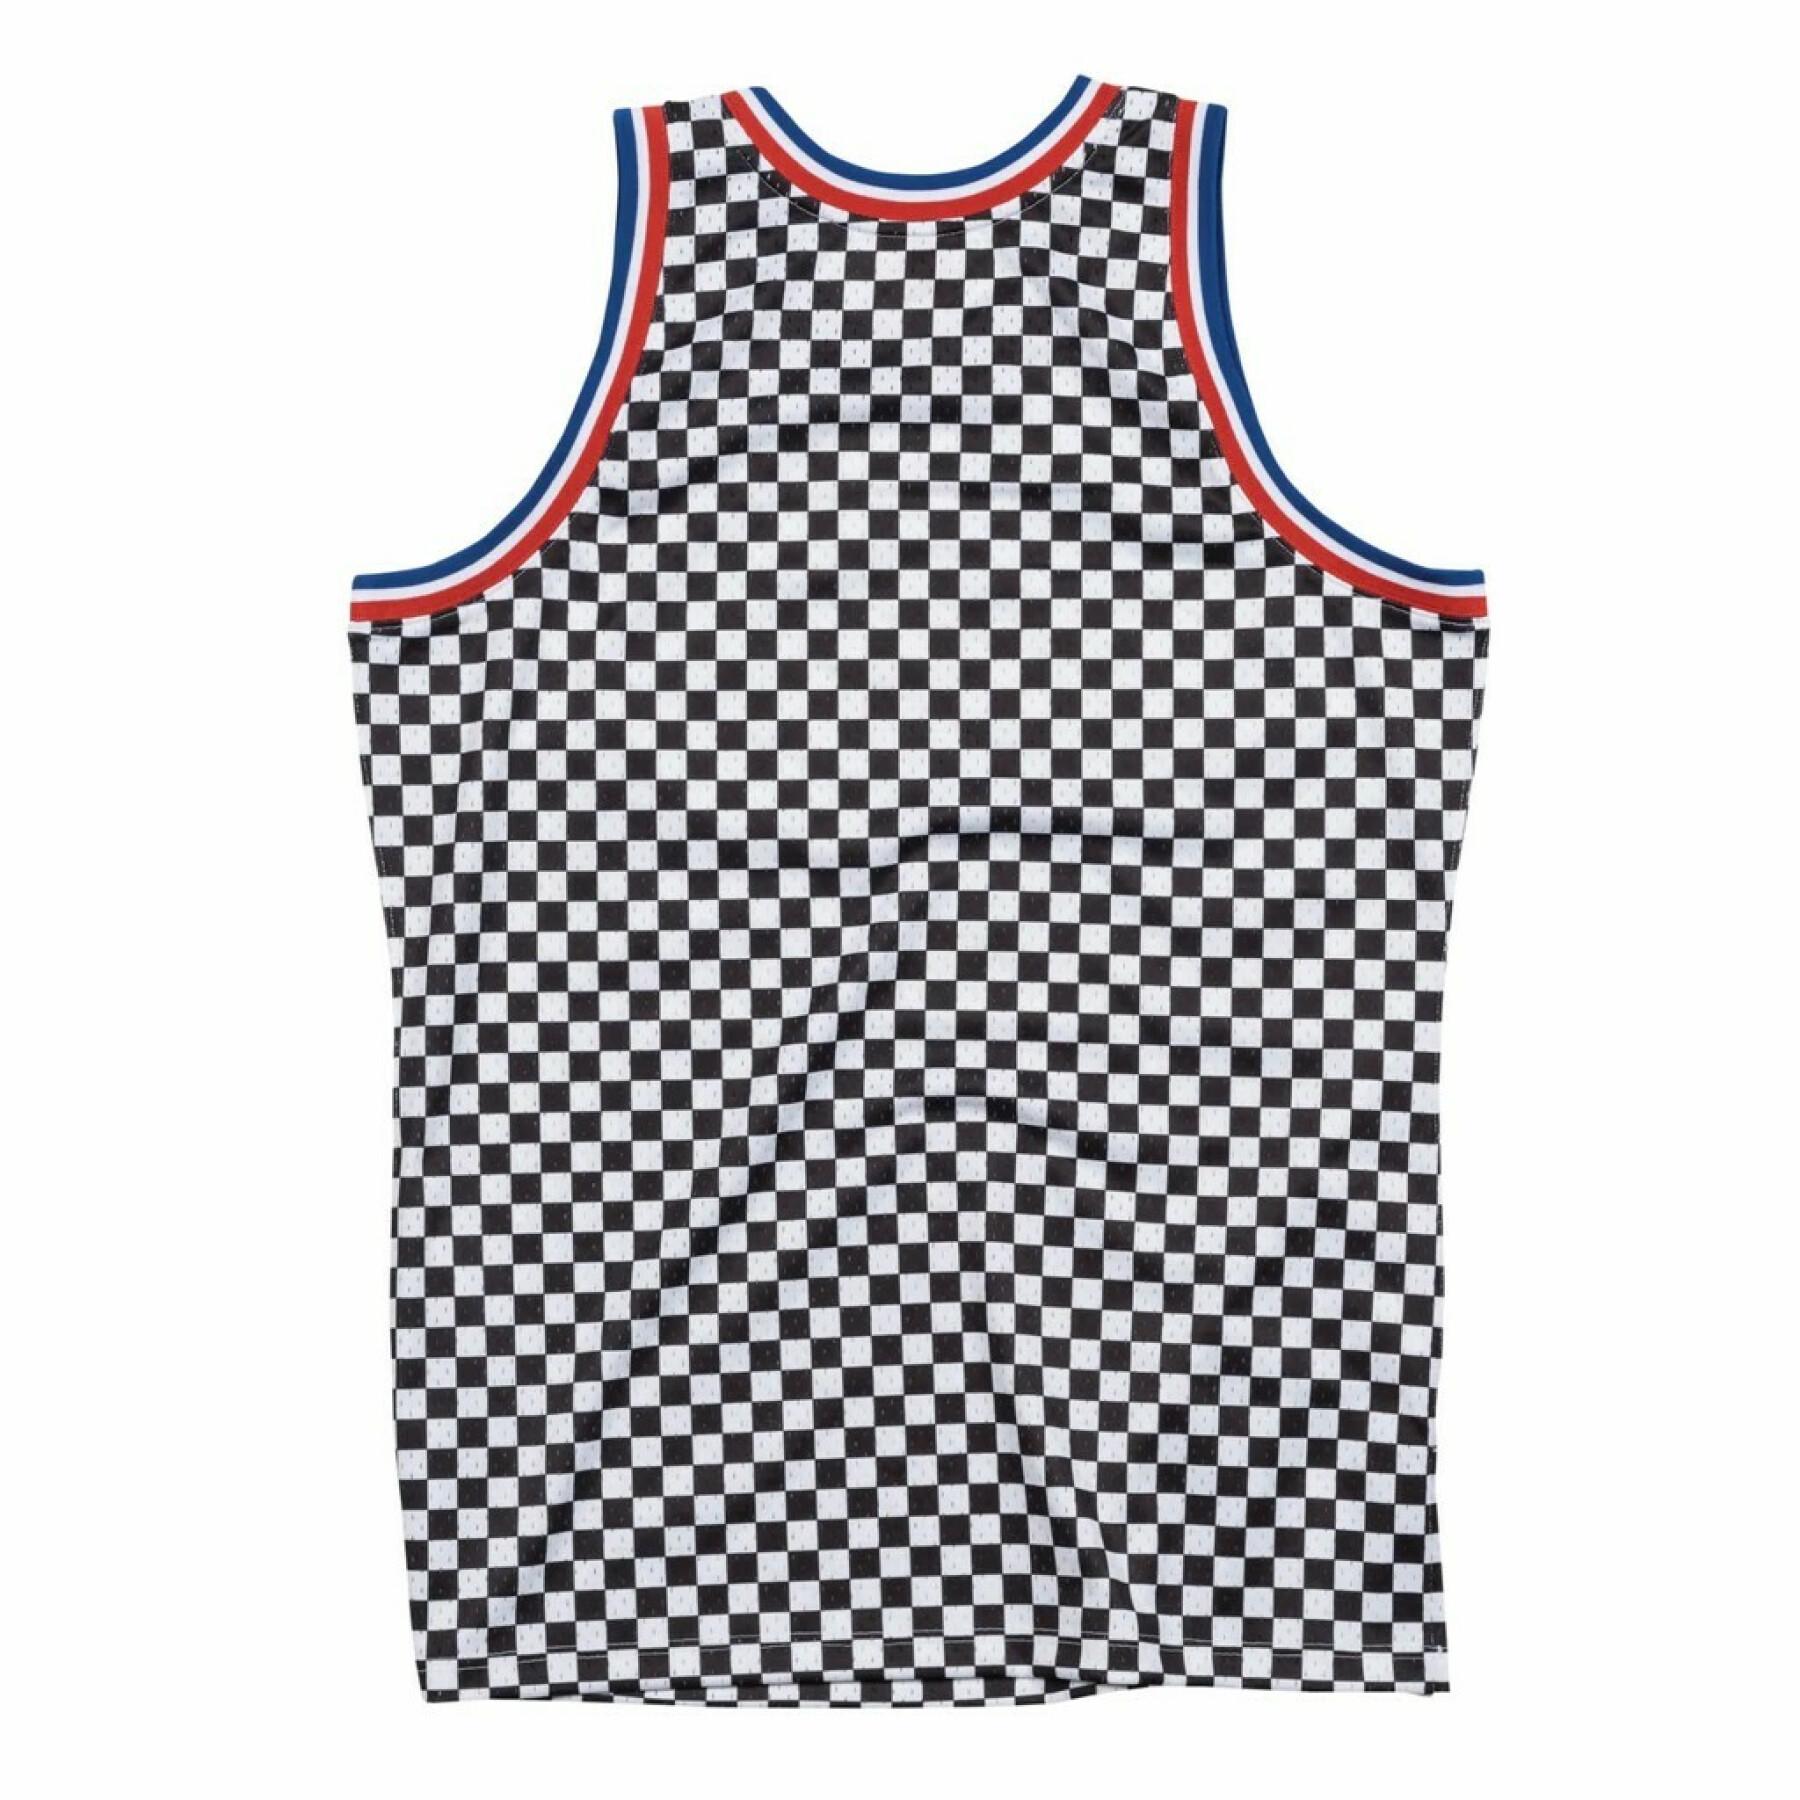 Maillot Cleveland Cavaliers checked b&w